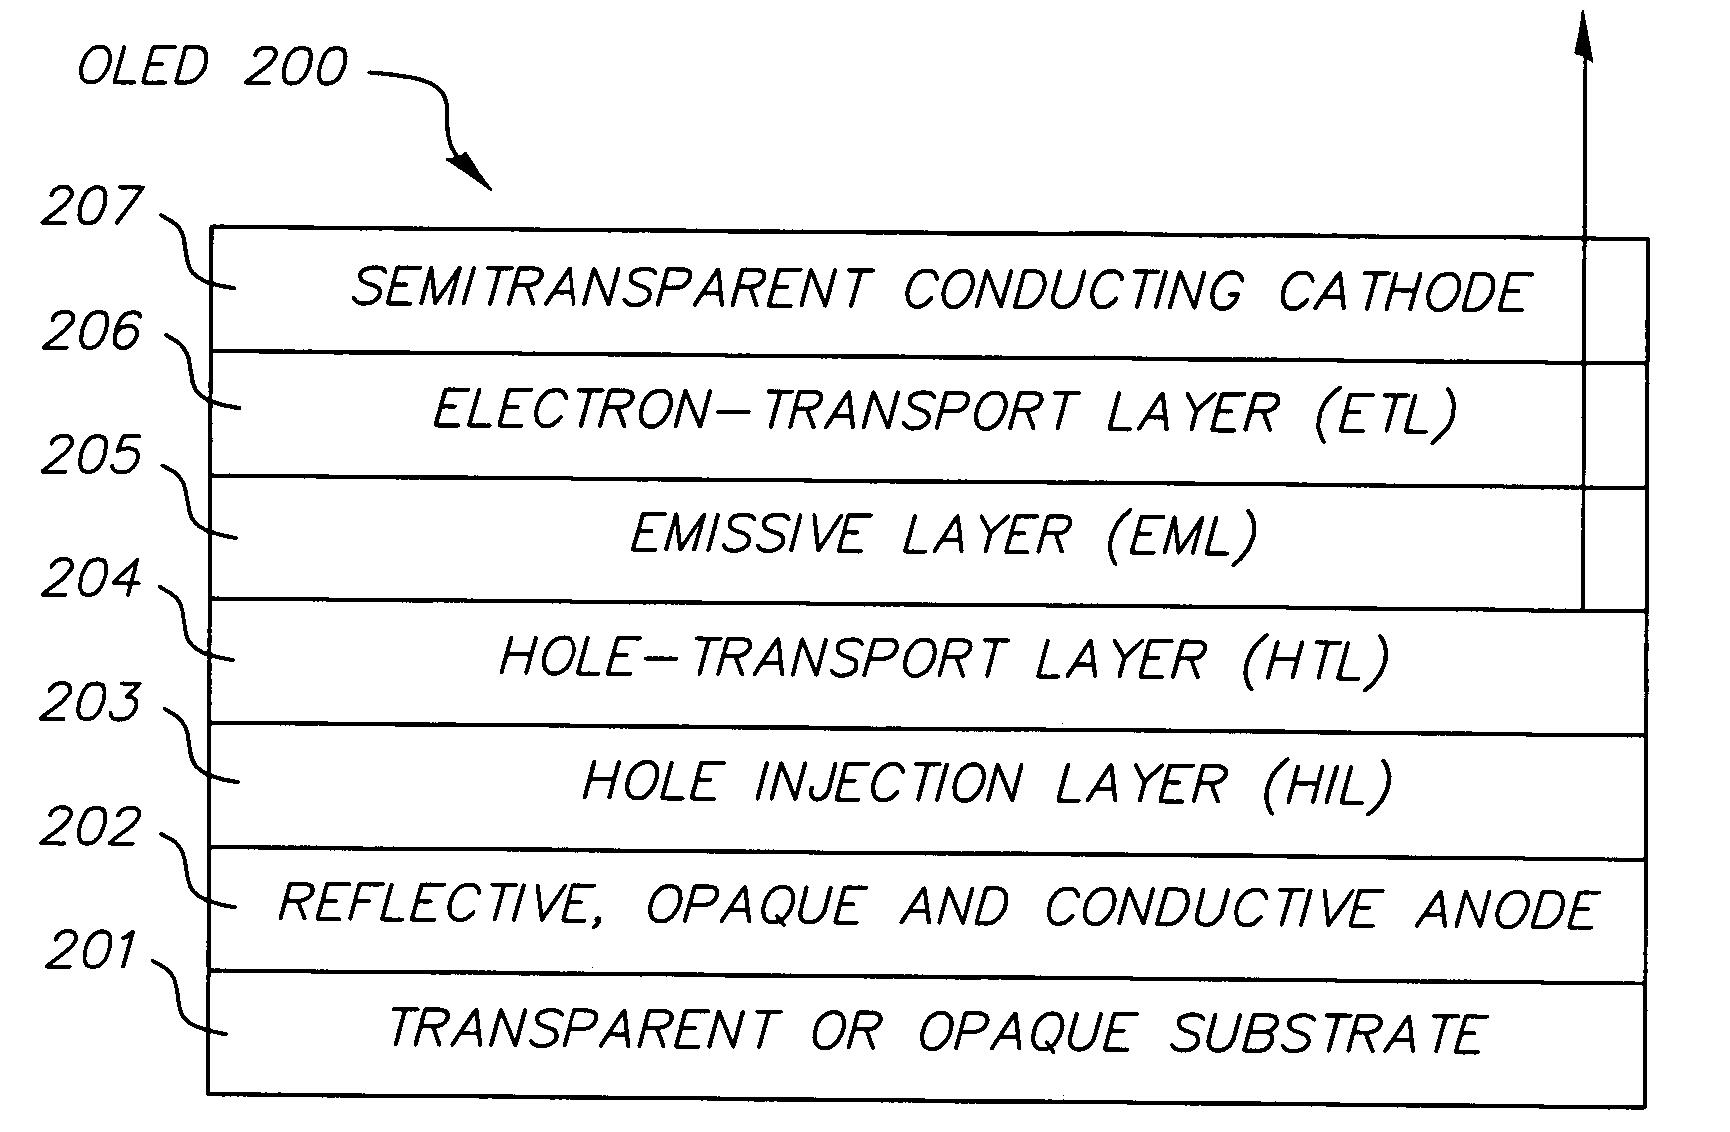 Organic light emitting diode with improved light emission through the cathode